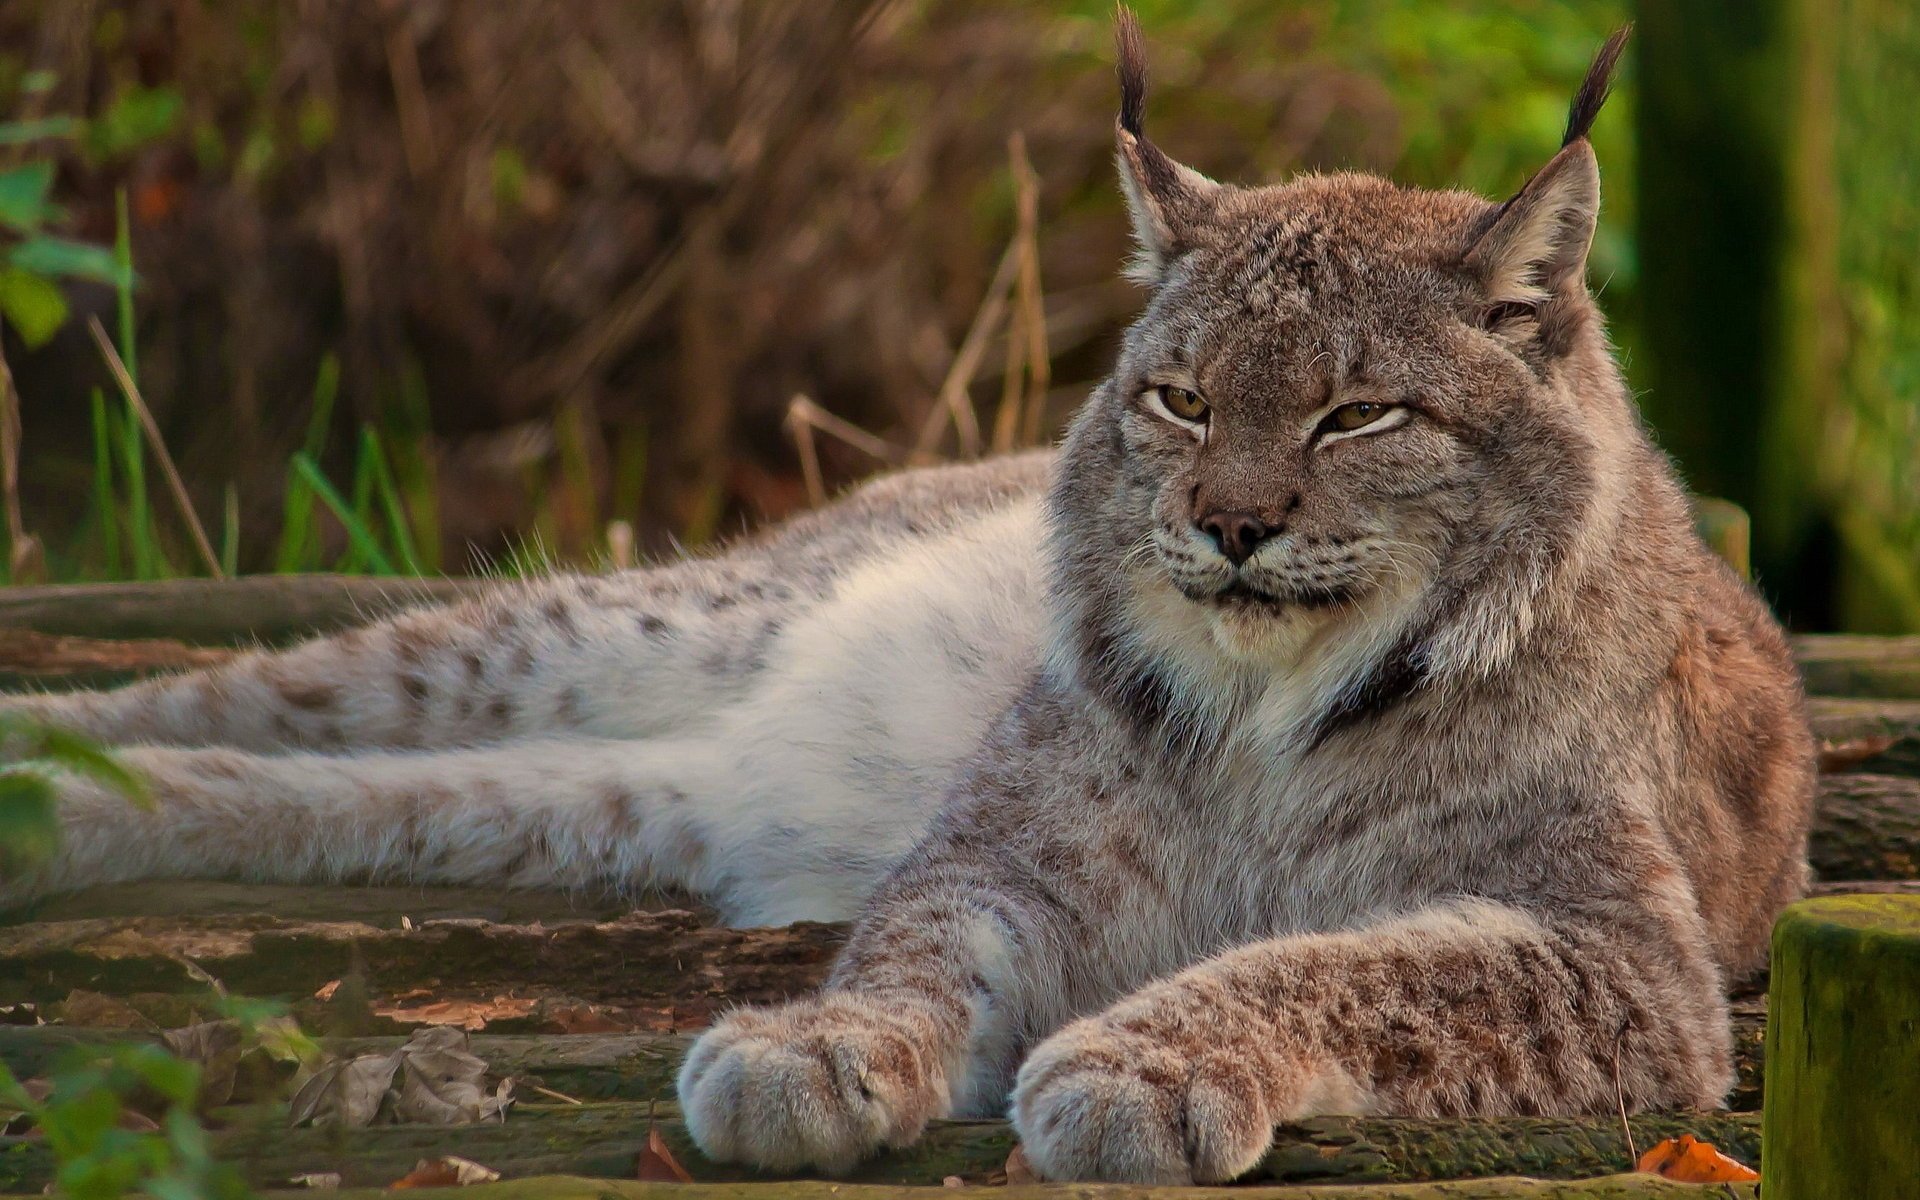 The lynx calmly demonstrates its power and greatness